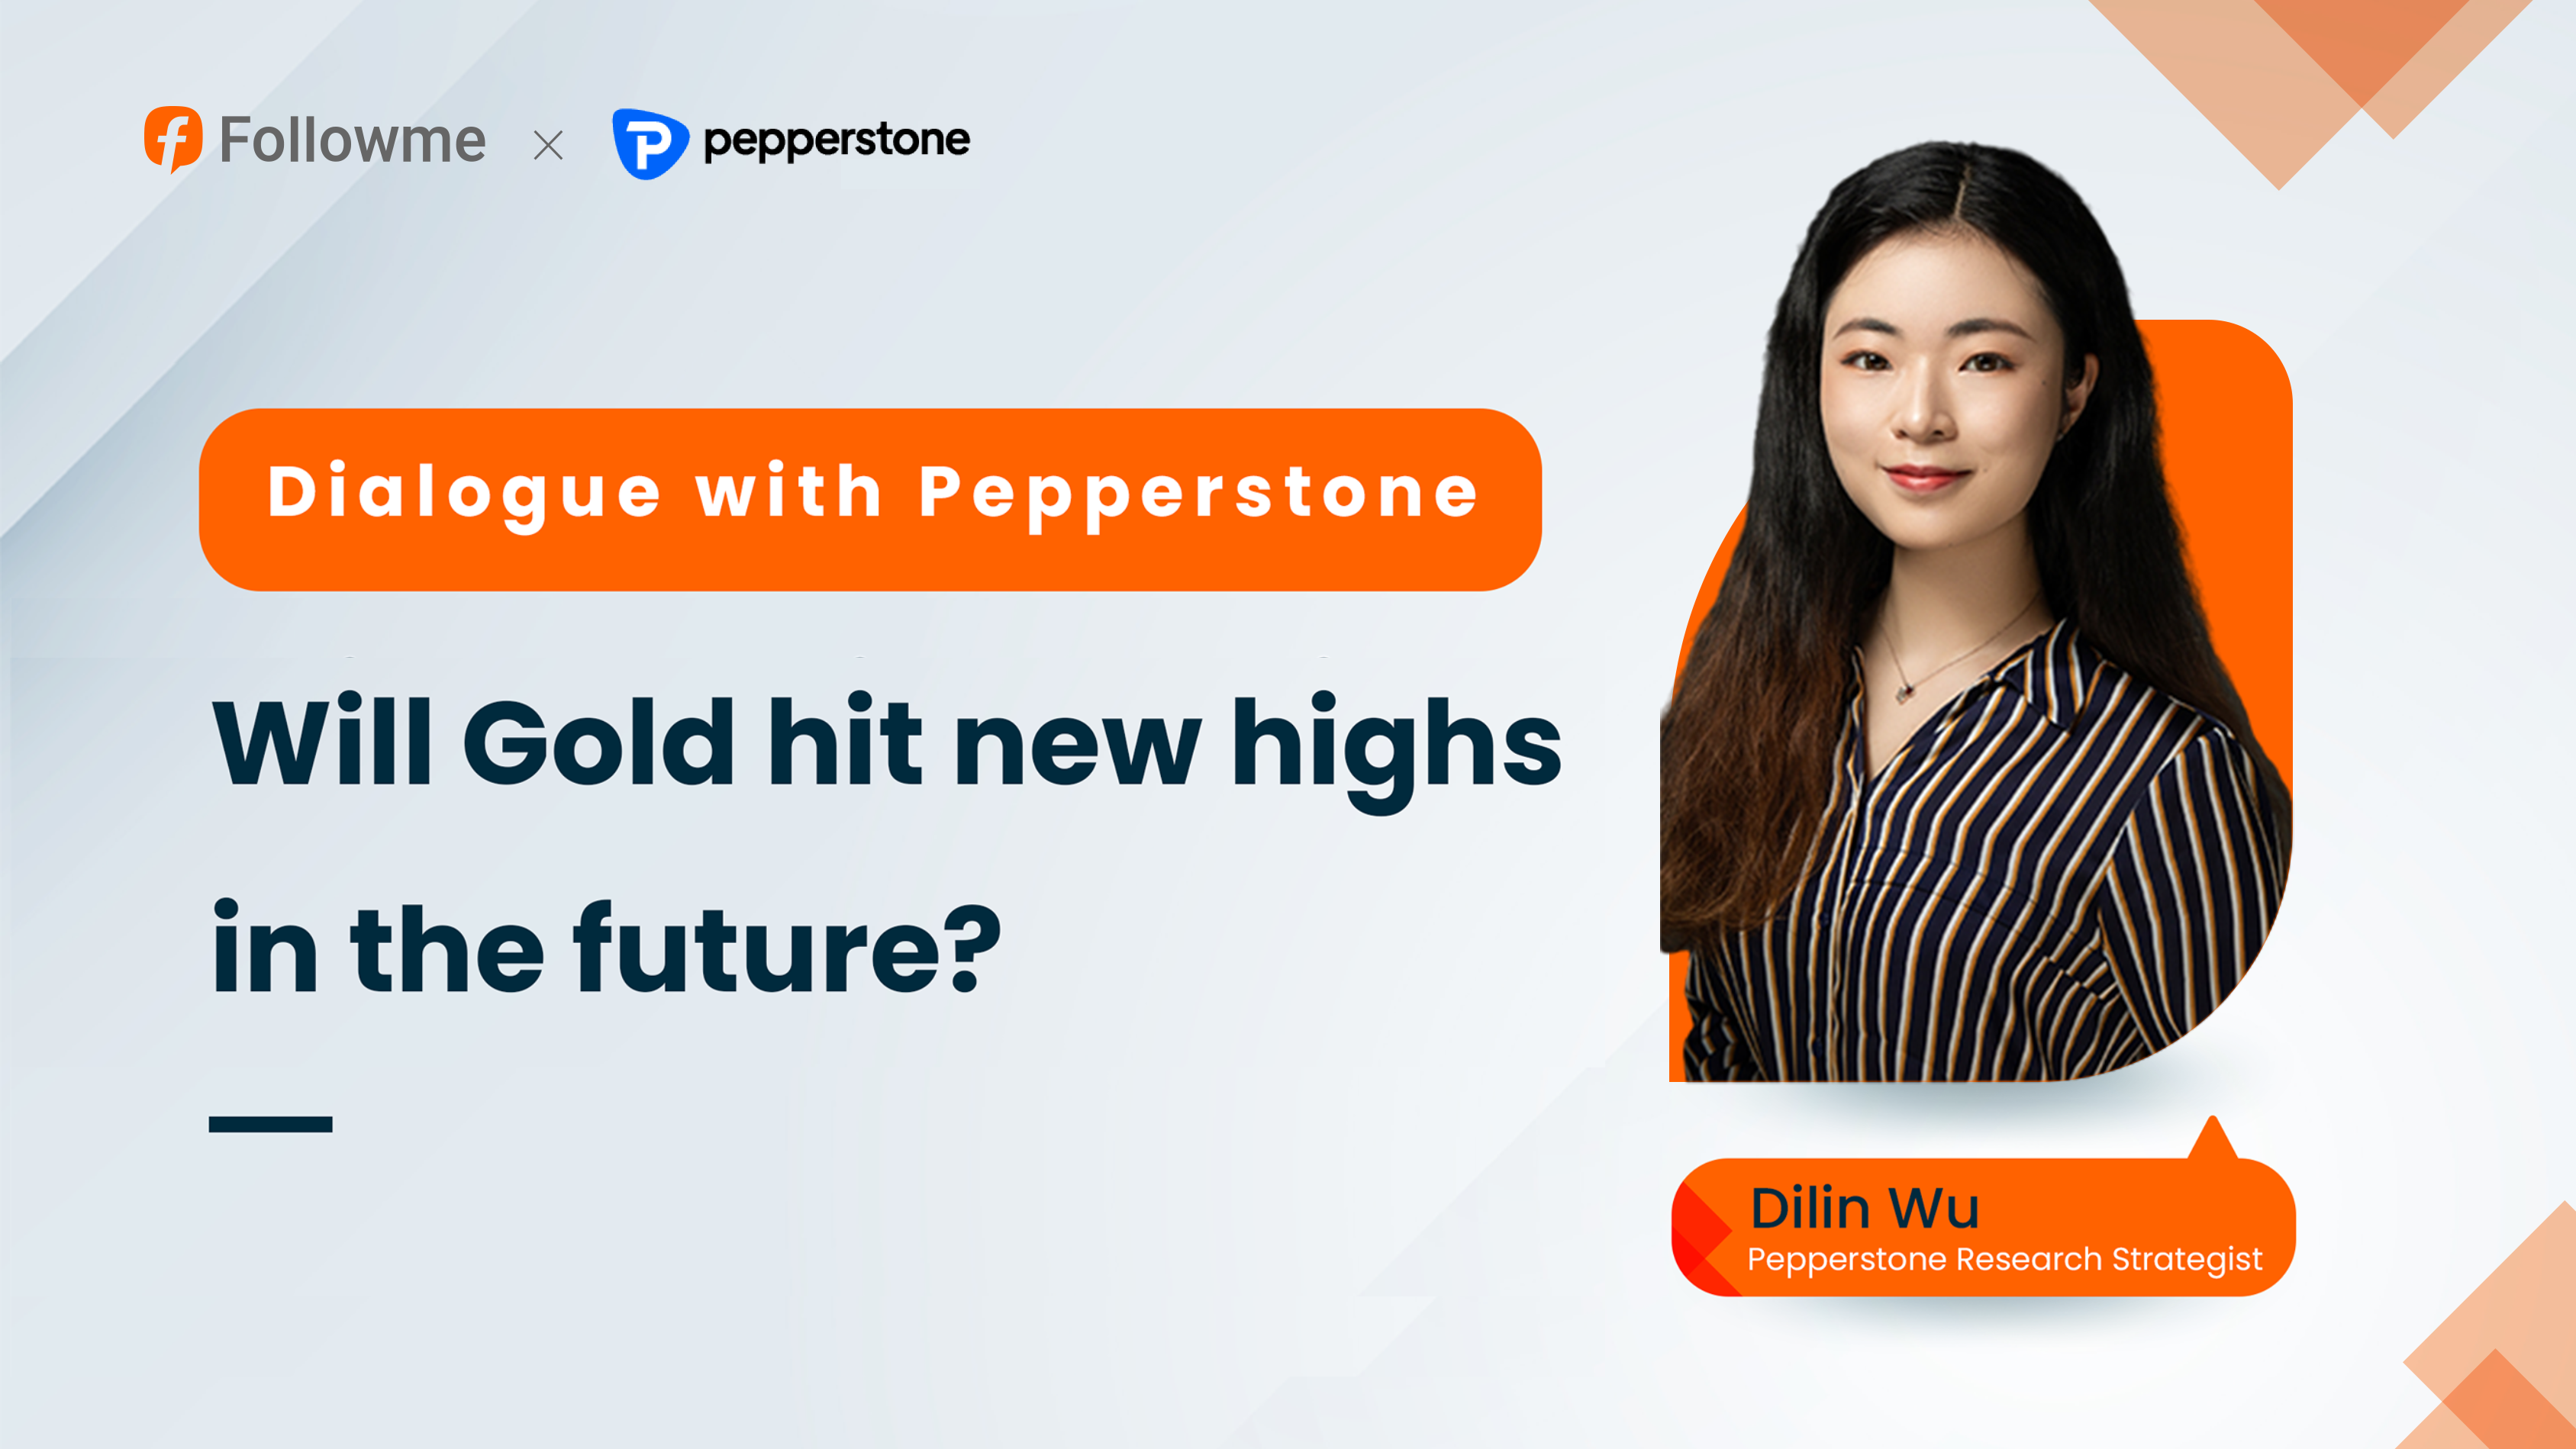 Dialogue with Pepperstone: Will Gold hit new highs in the future?